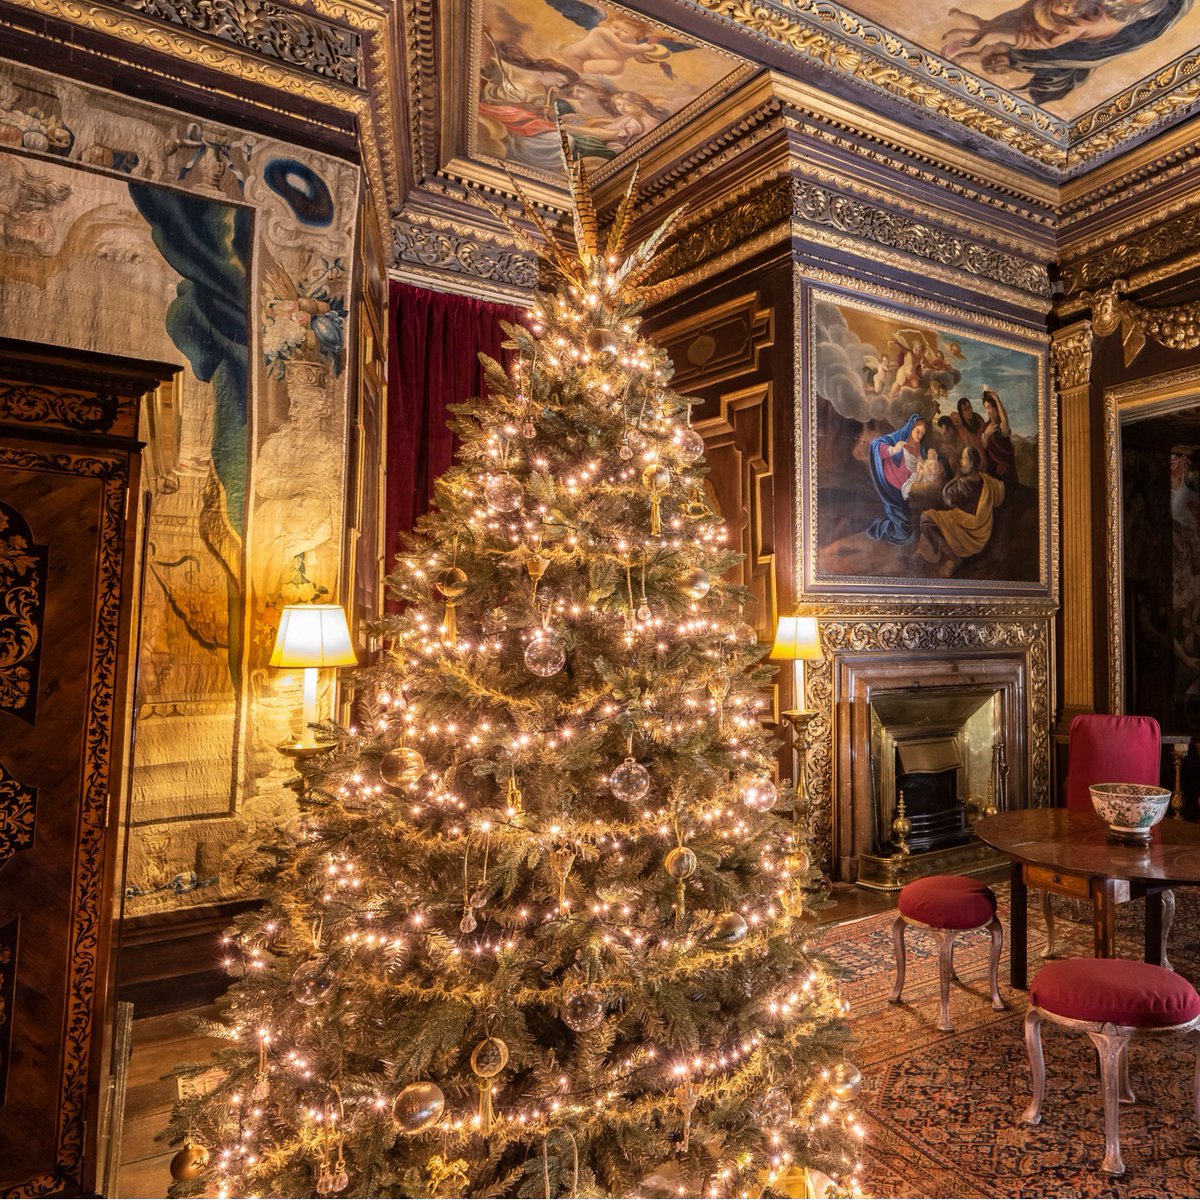 Merry Christmas from Mid Wales. Nadolig Llawen, pawb 🎄🎅 Wherever you are in the world, however you're spending the festive period, we hope you have a magical time. #VisitMidWales #RealMidWales #VisitWales #CastellPowis #PowisCastle 📷 @ntpowiscastle